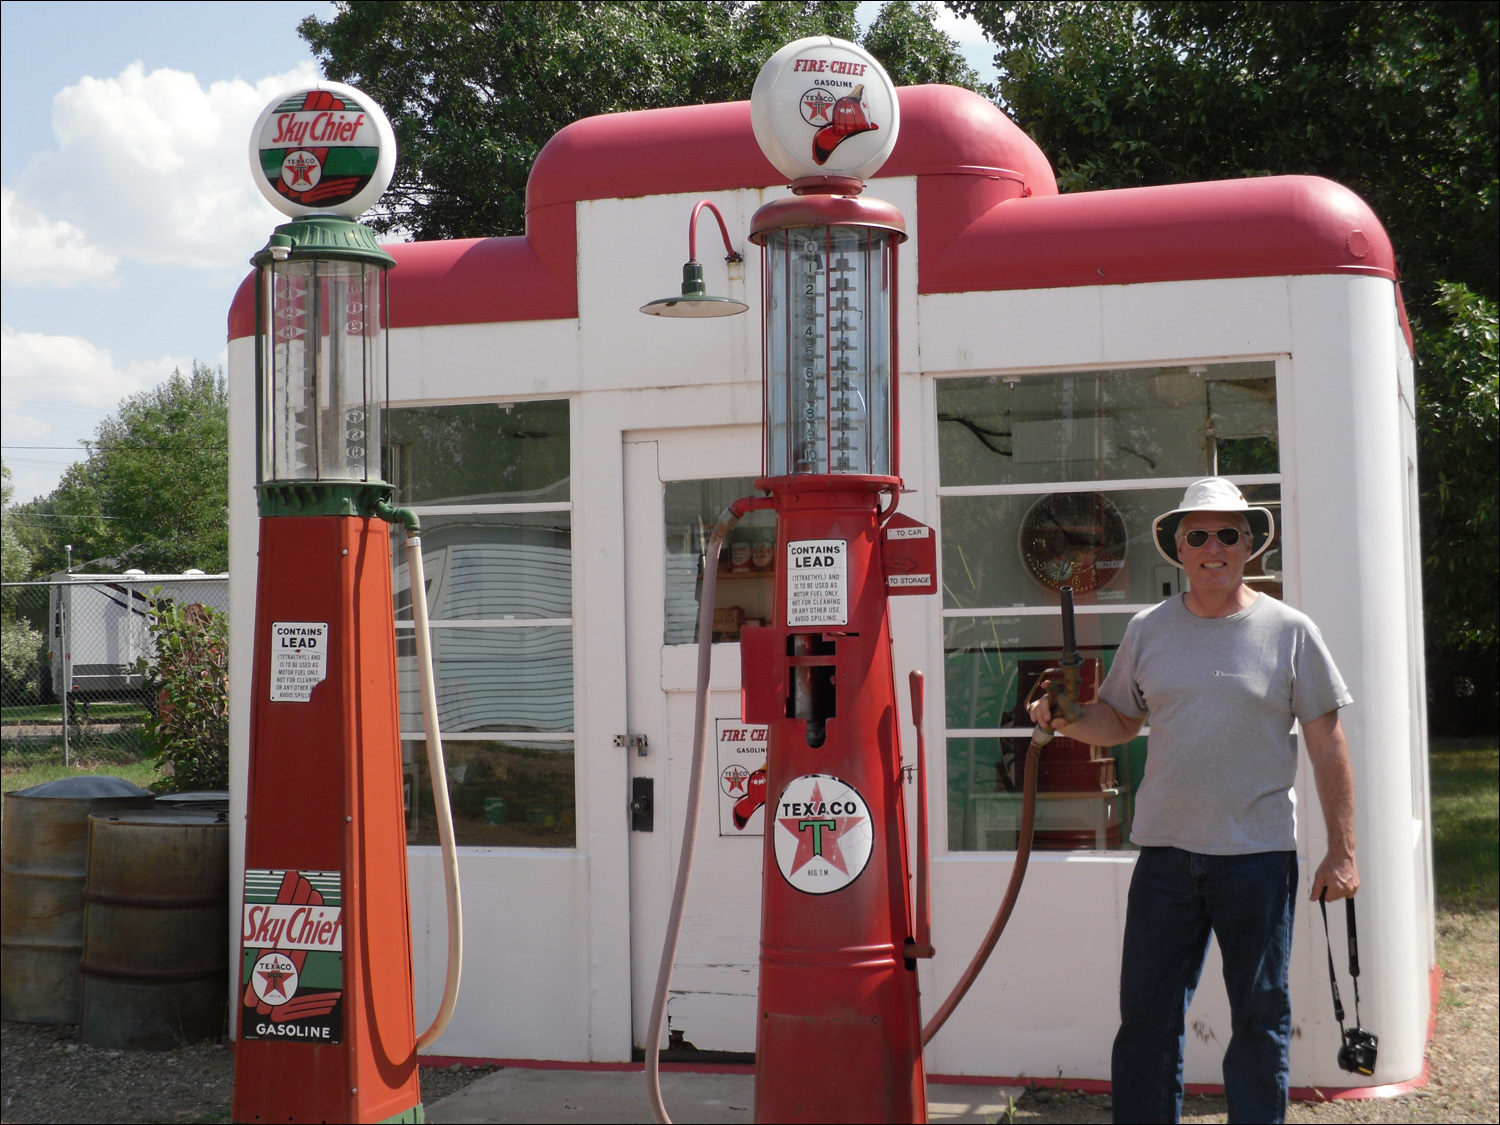 Fort Benton, MT Agriculture Museum-Bob reliving his first job at old town gas station